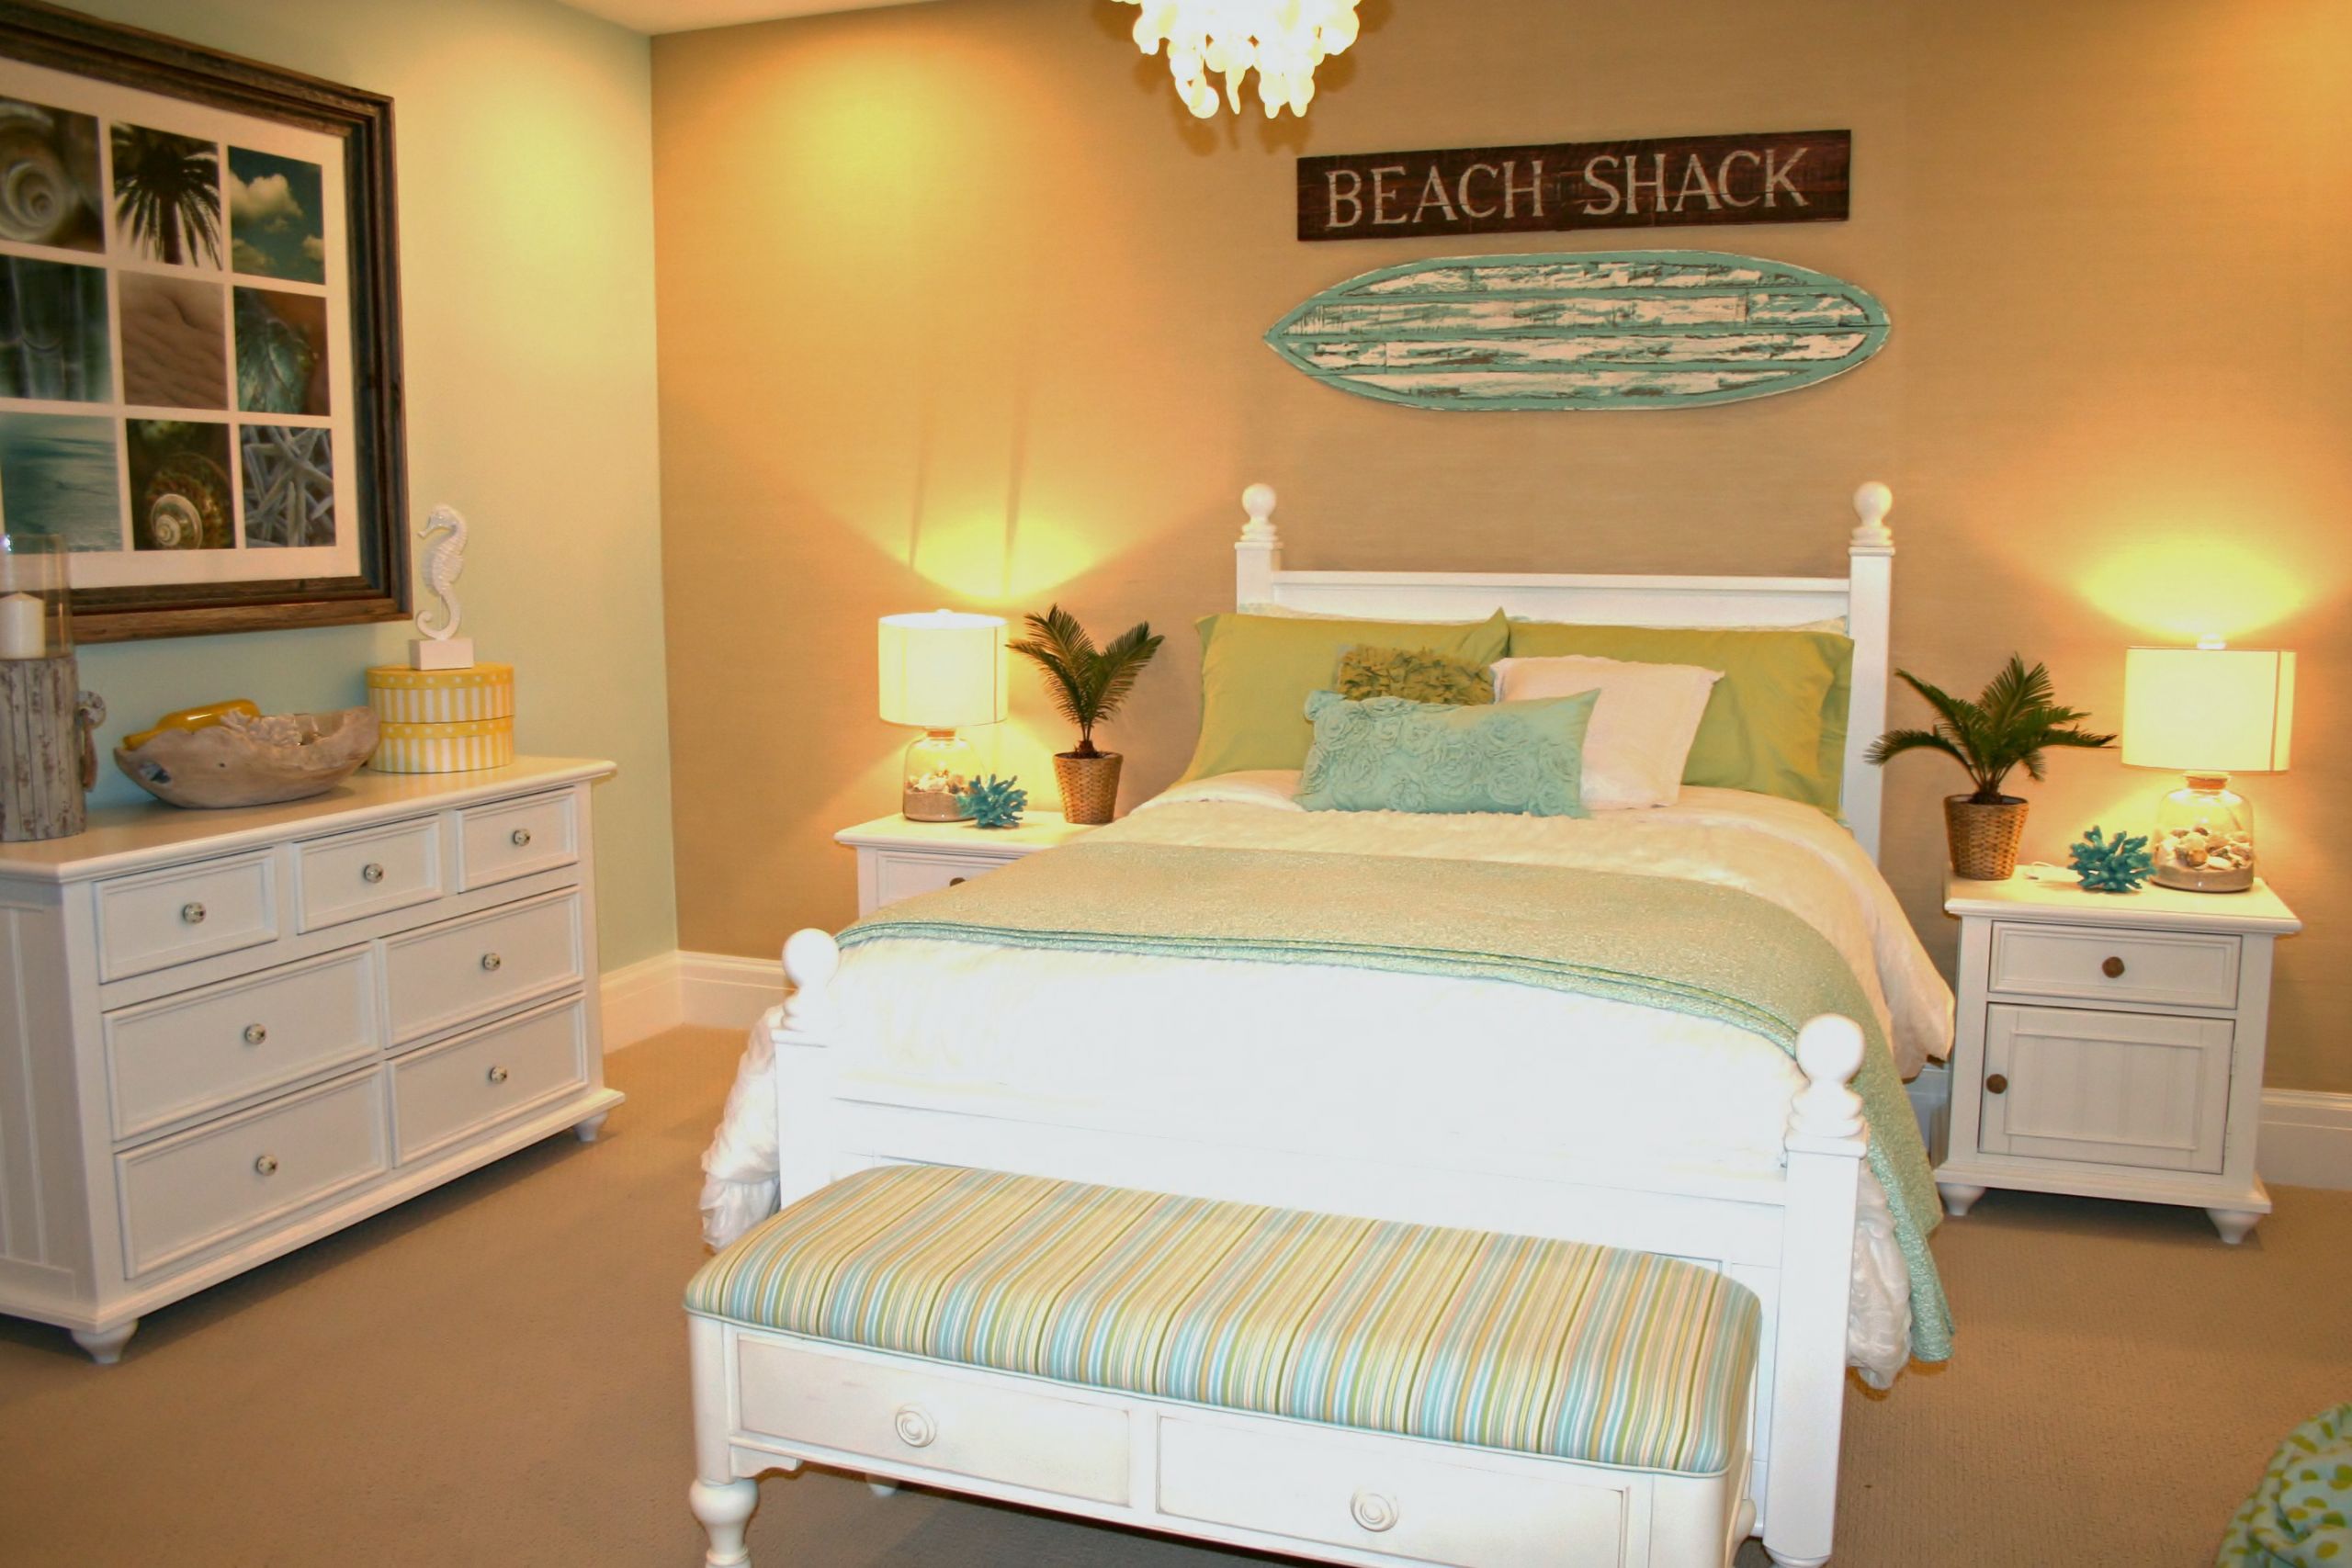 Beach Themed Kids Bedroom
 Exciting Beach Bedroom Themes for Truly Refreshing